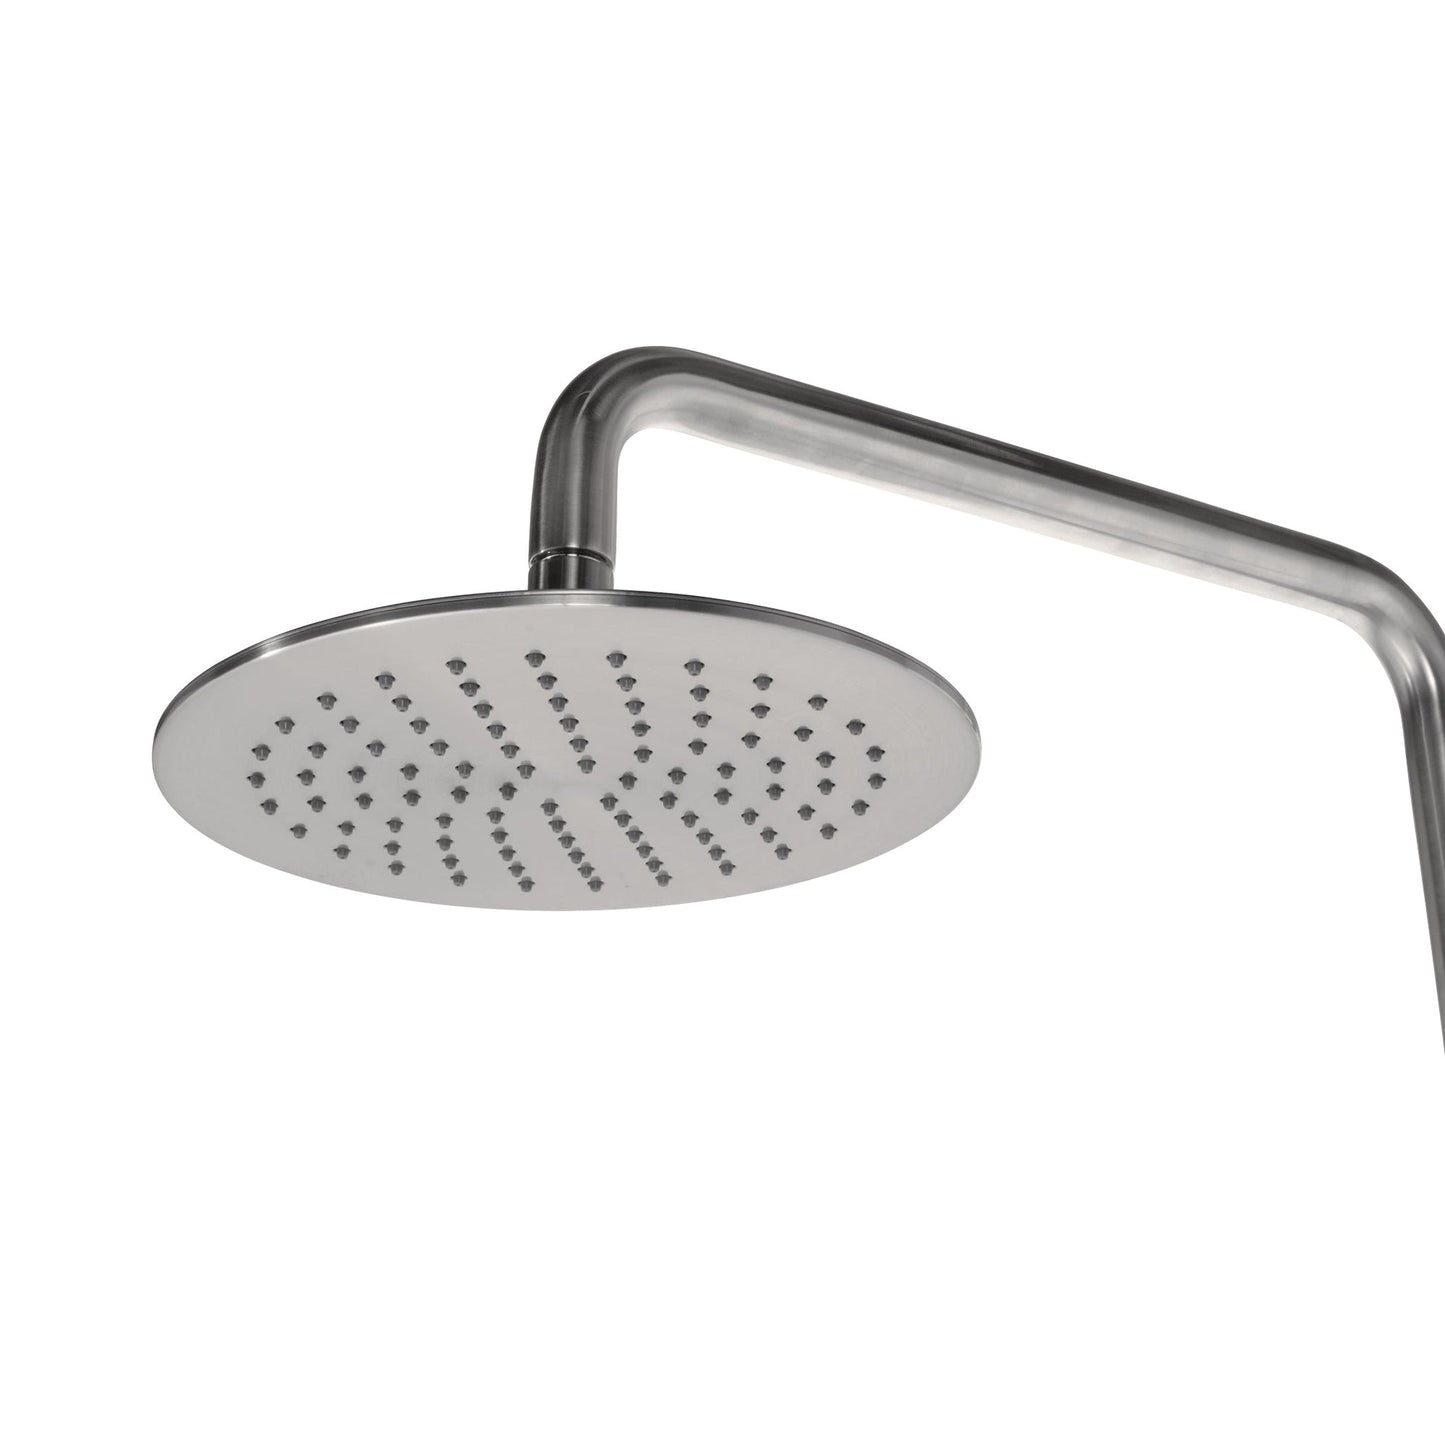 PULSE ShowerSpas Aquarius 2.5 GPM Shower System in Brushed Nickel Finish With Rain Shower Head and Single Function Hand Shower